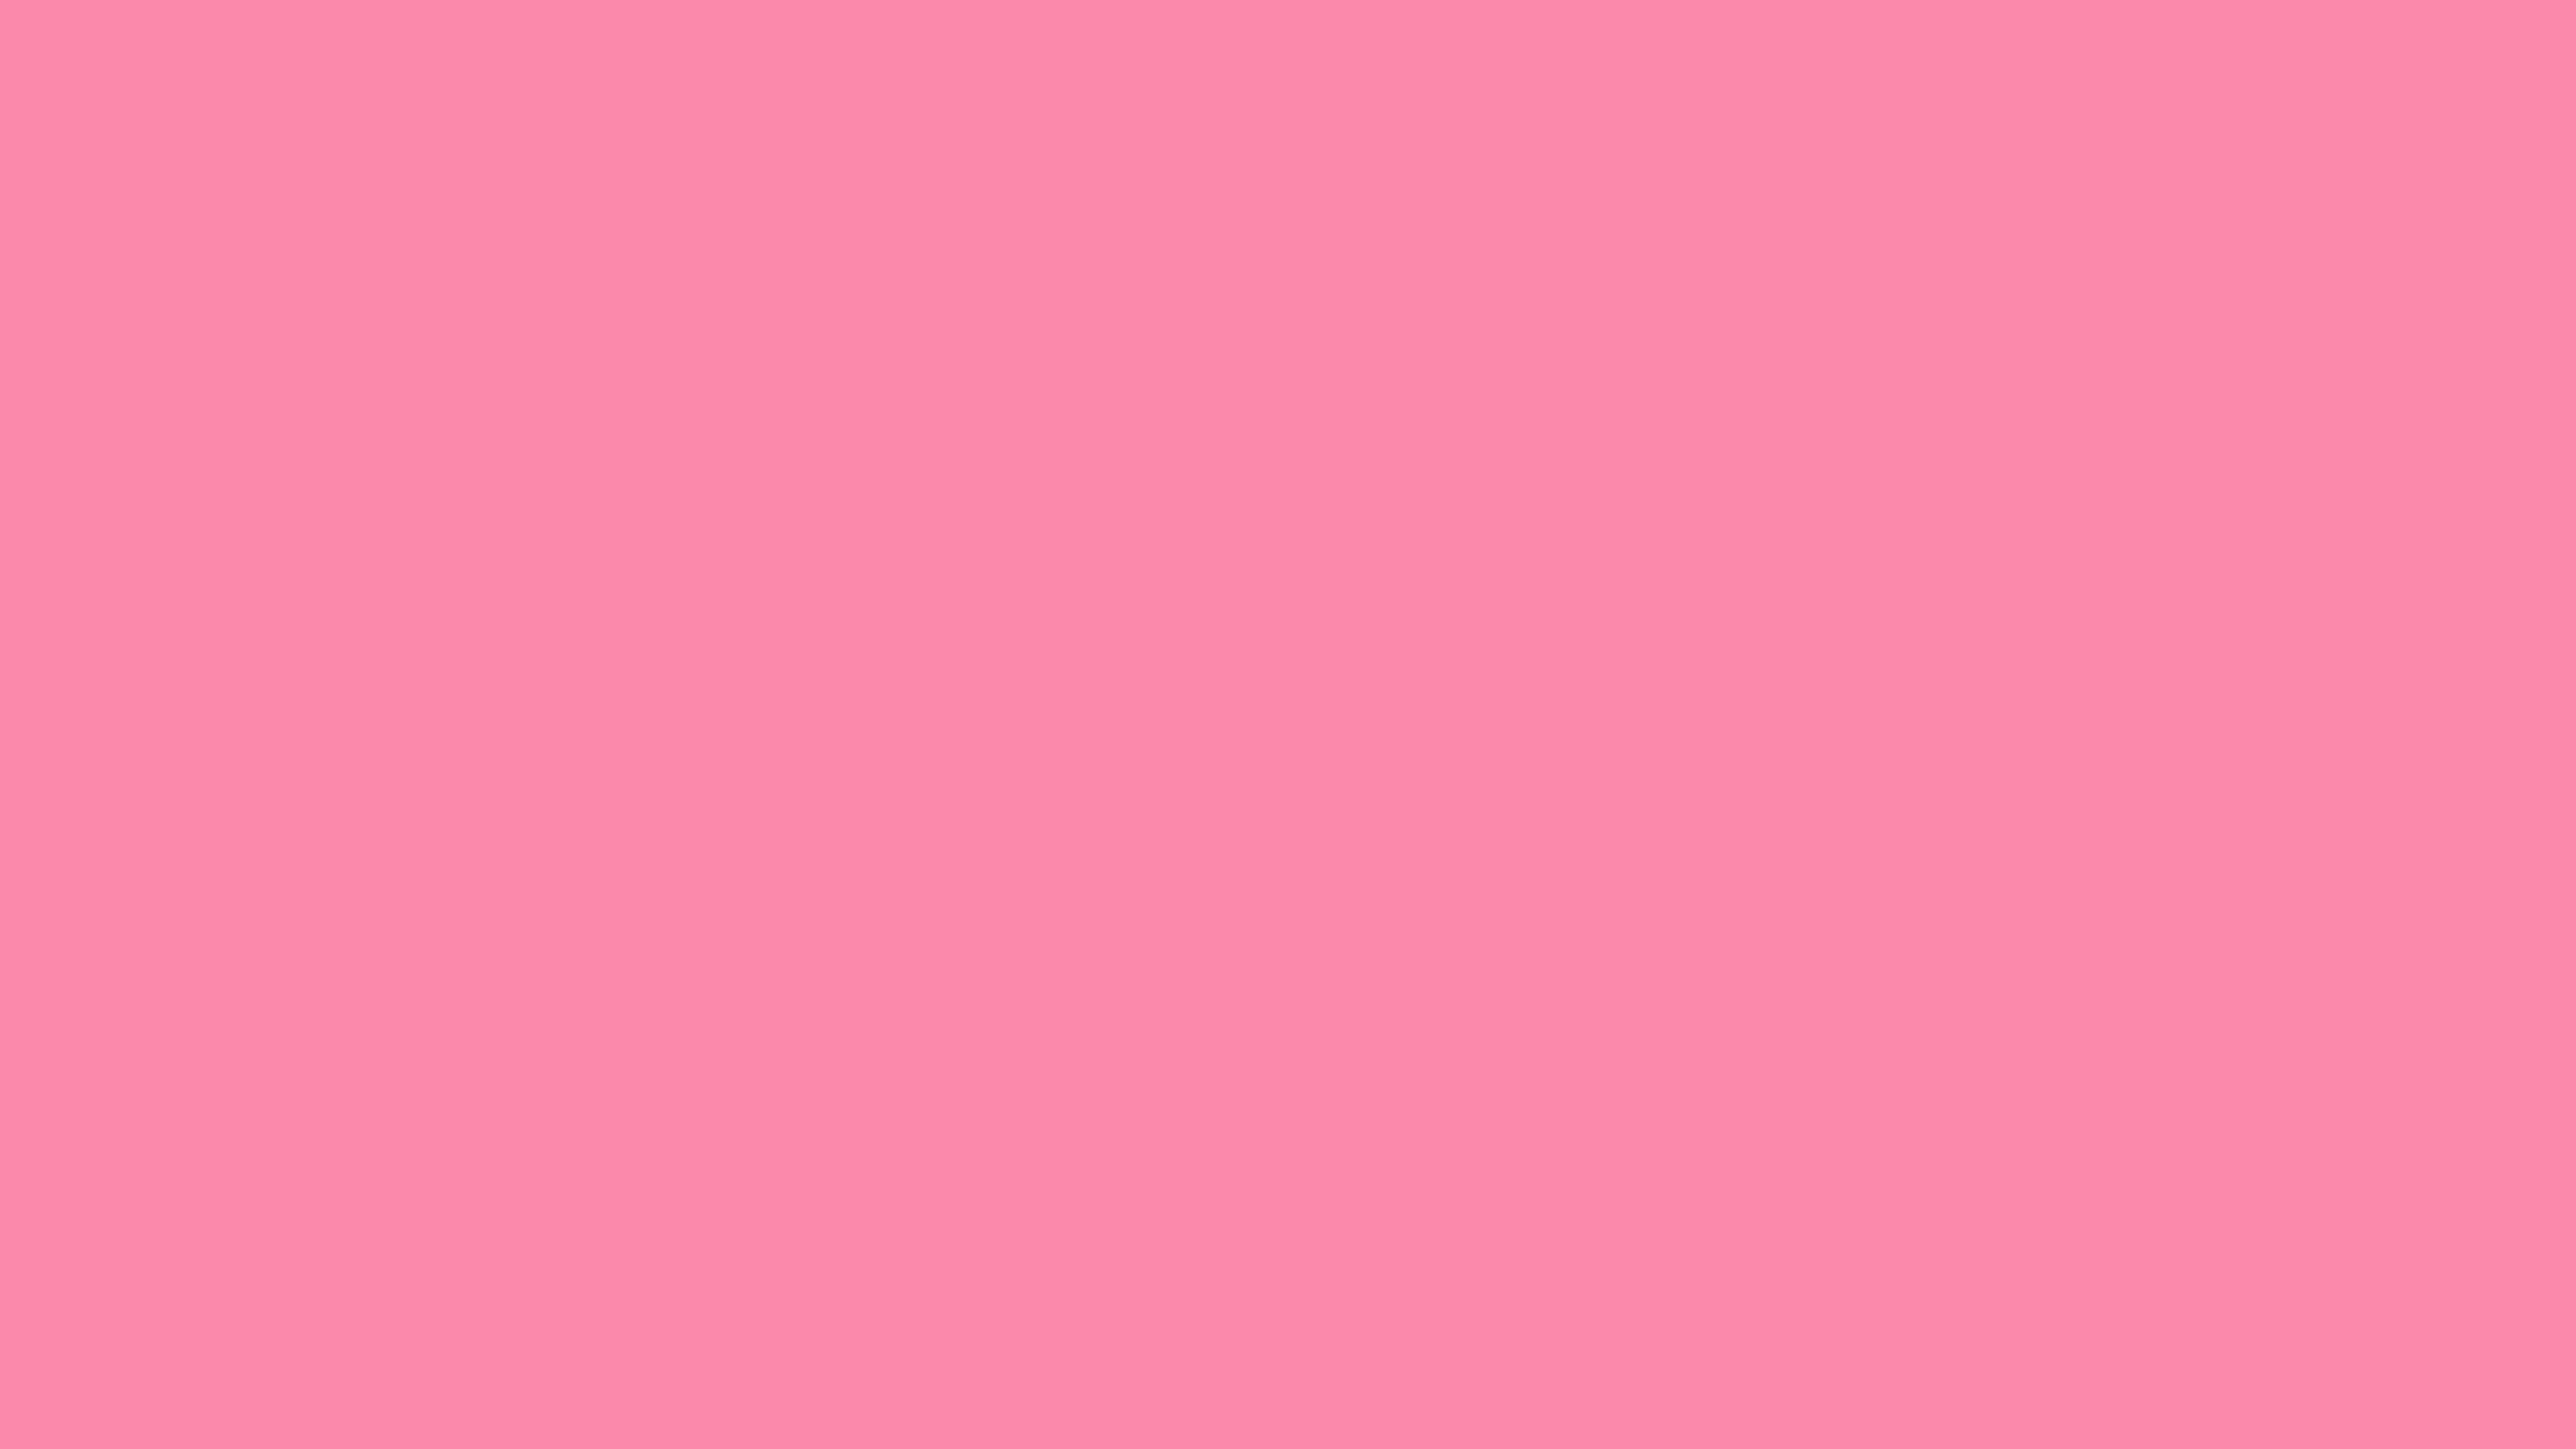 7680x4320 Tickle Me Pink Solid Color Background